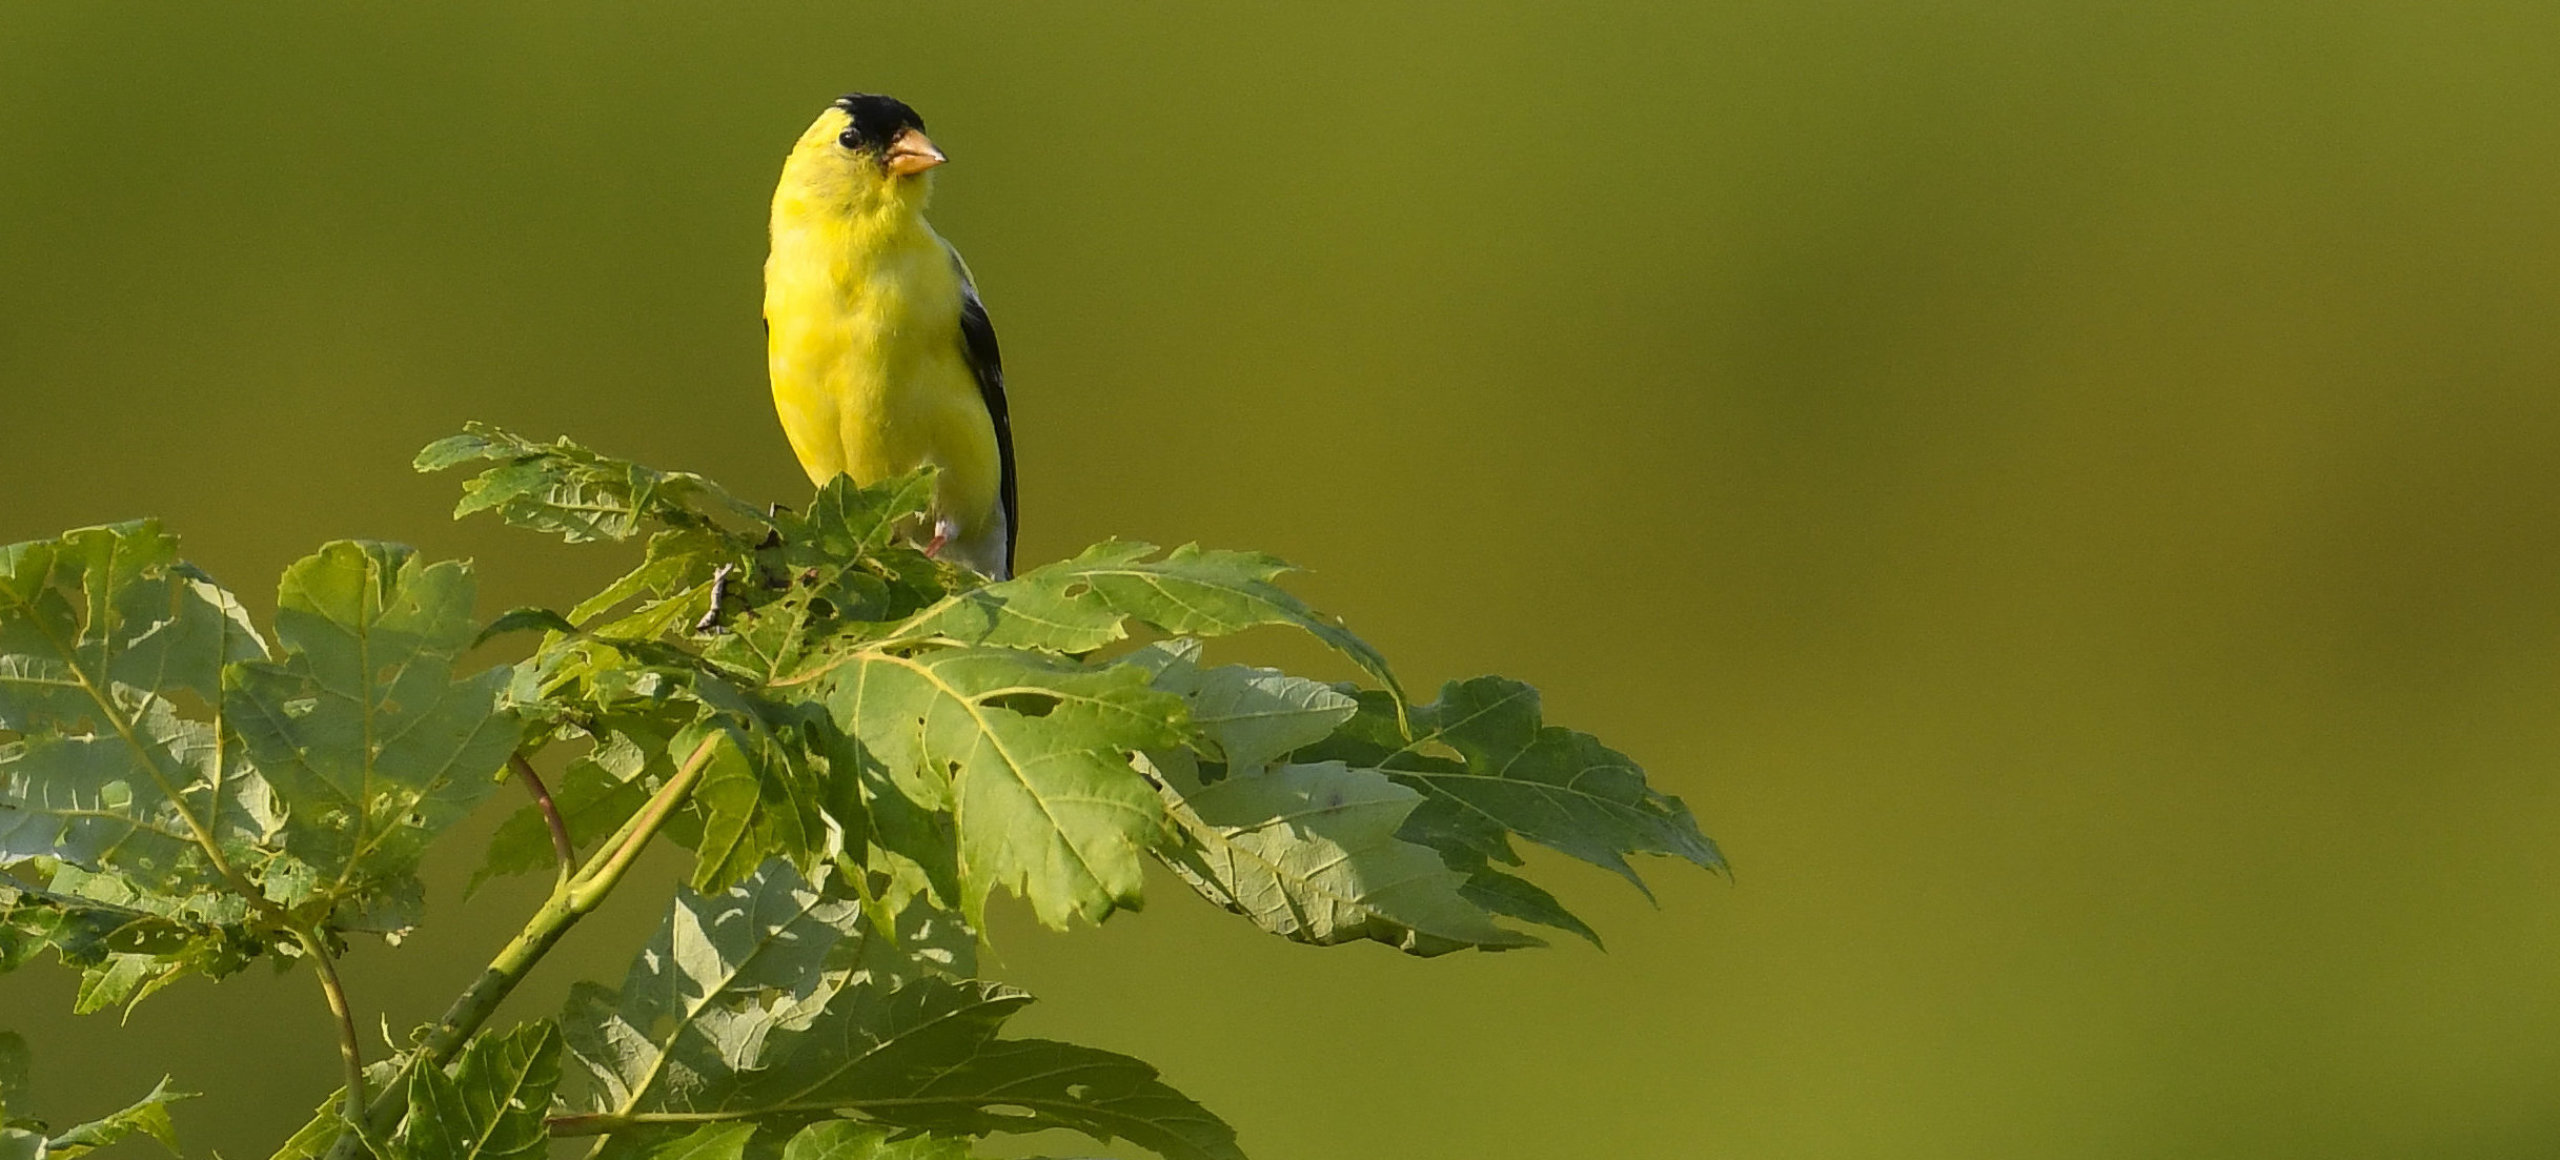 A small yellow bird with black markings on it's face looks to the right while perched on a leafy branch.